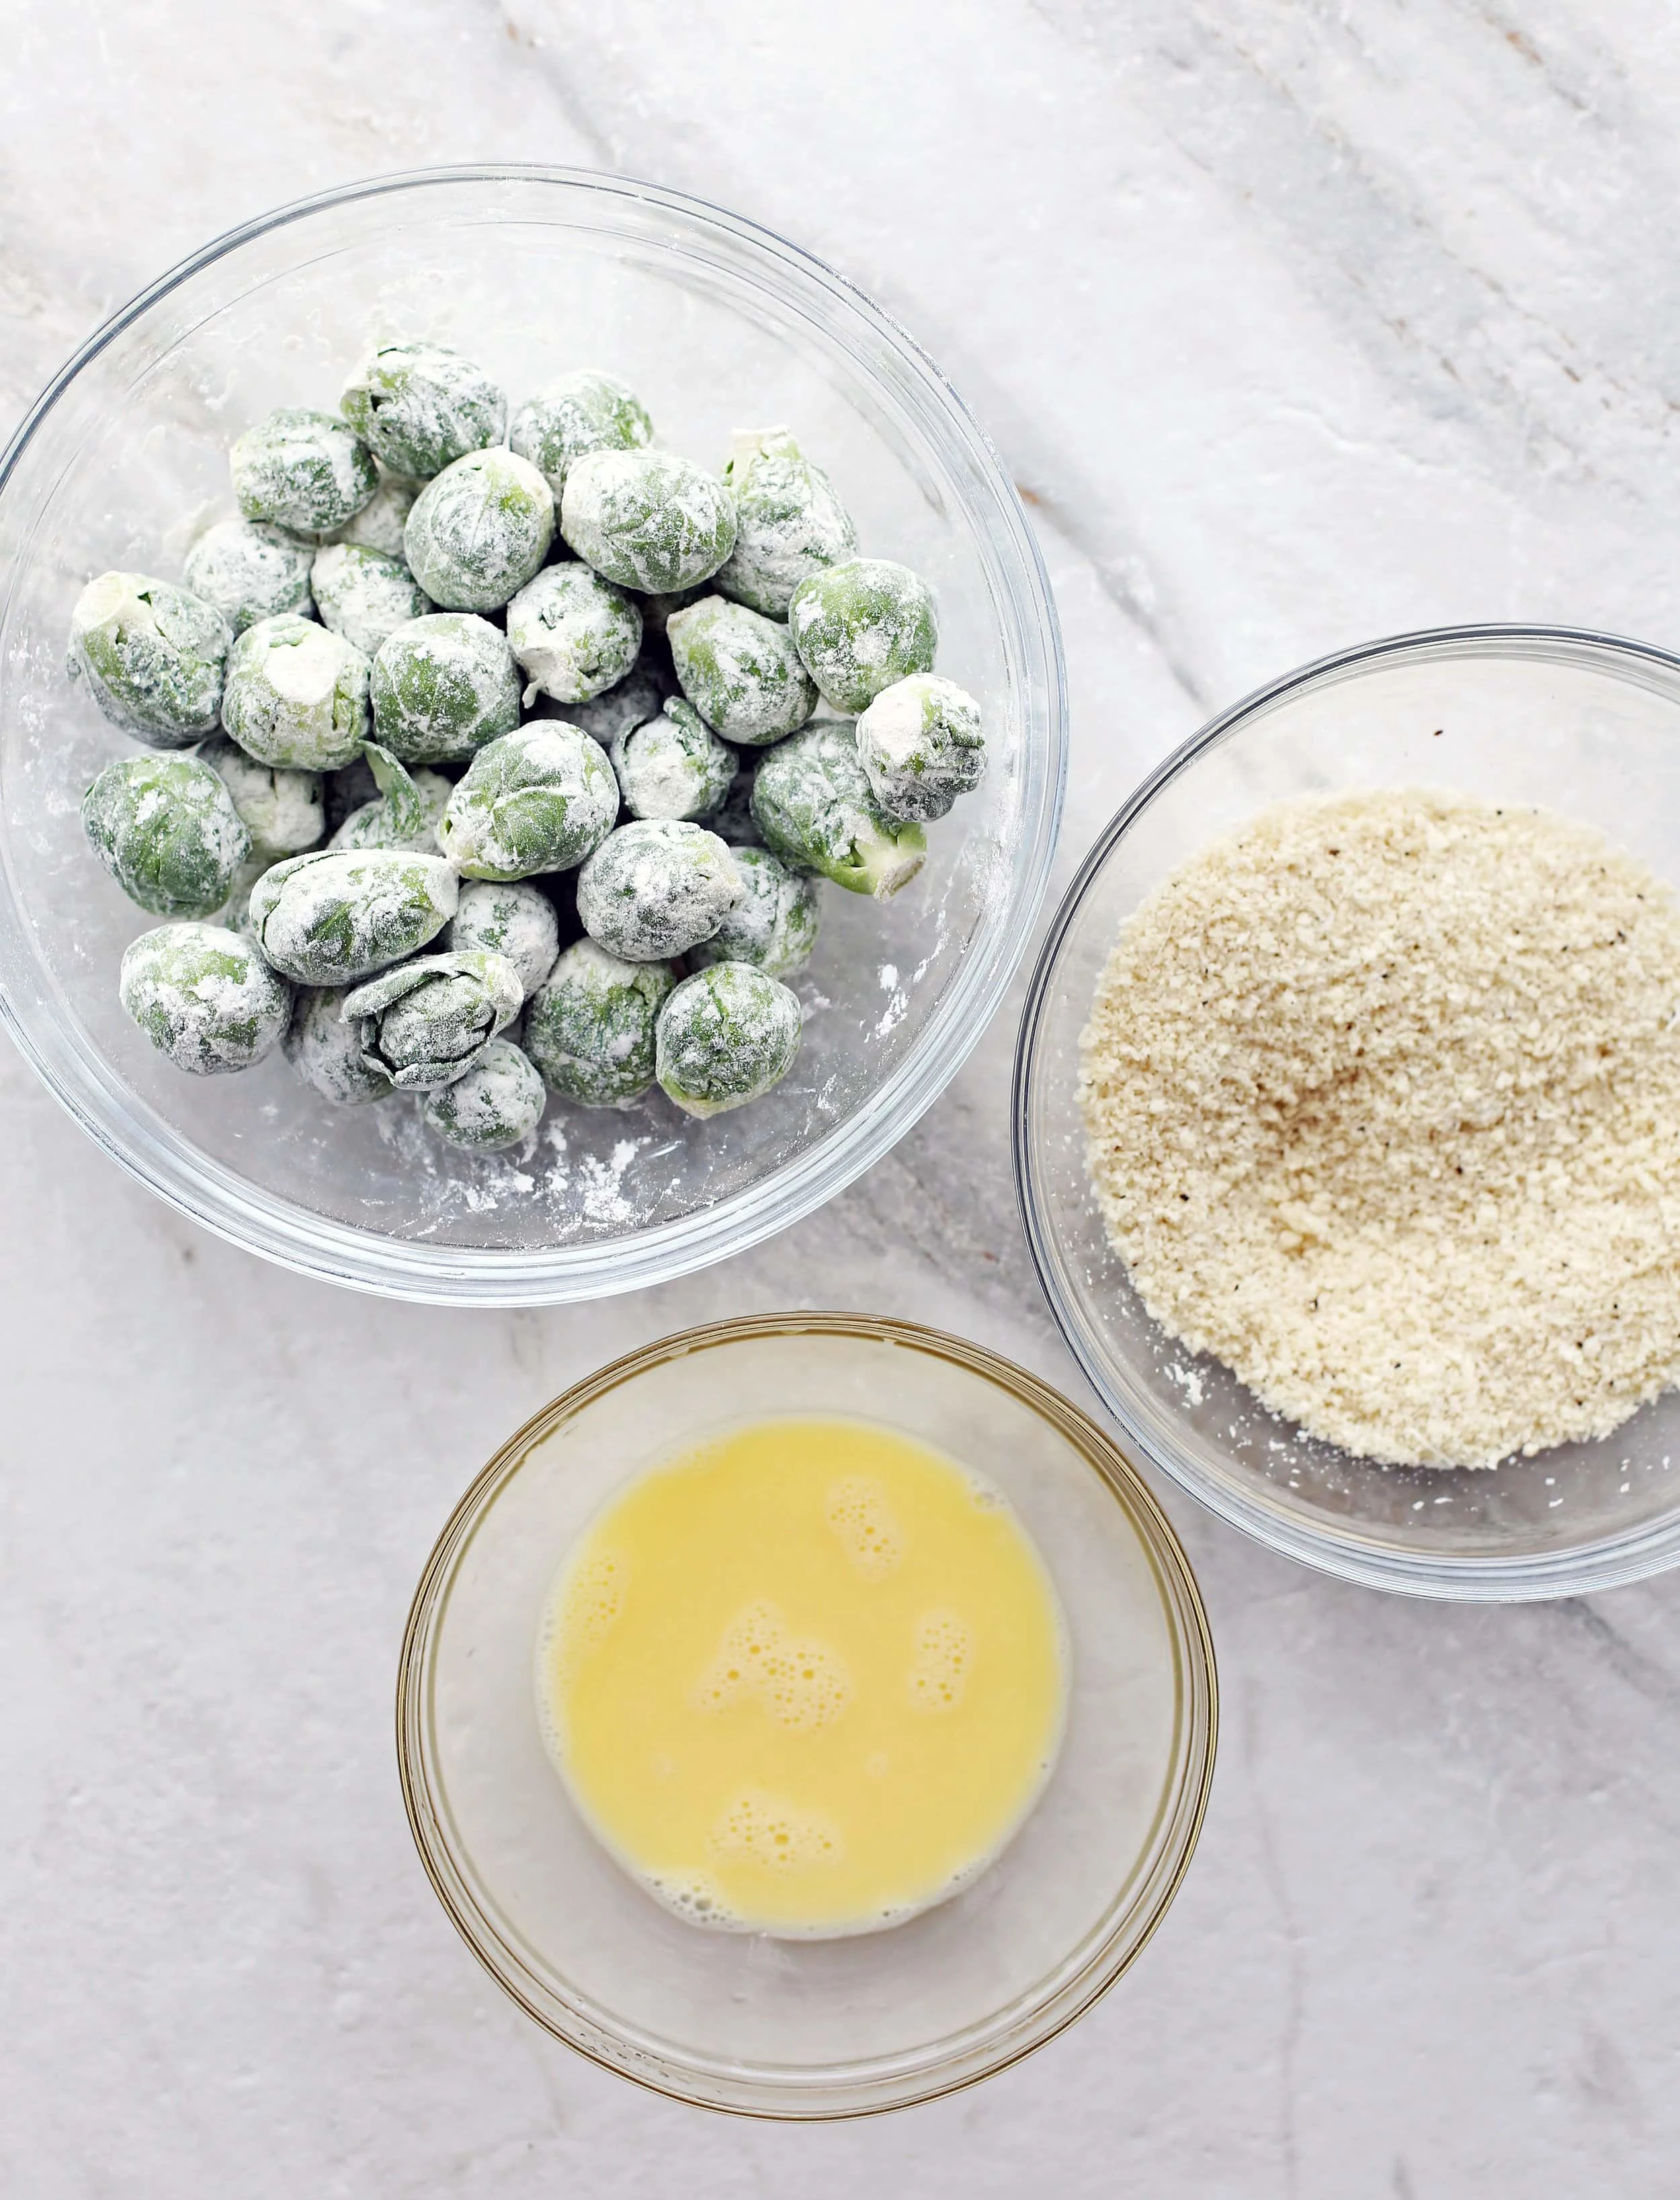 Bowls containing beaten eggs, breadcrumbs, and floured Brussels sprouts.